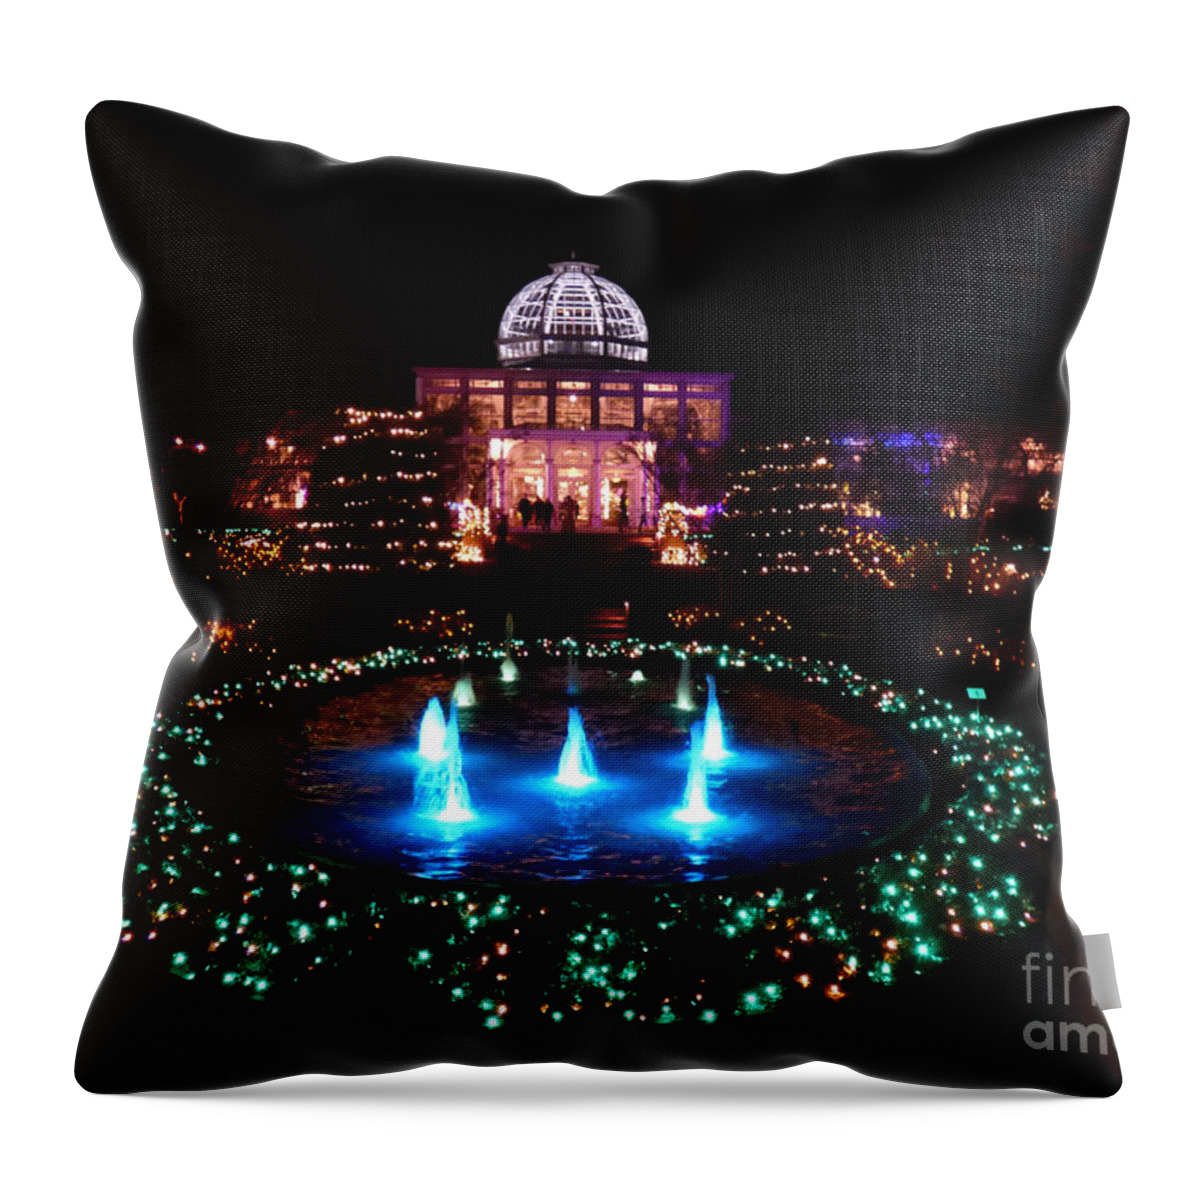 Conservatory Throw Pillow featuring the photograph Conservatory During Garenfest of Lights 2017 by Jean Wright